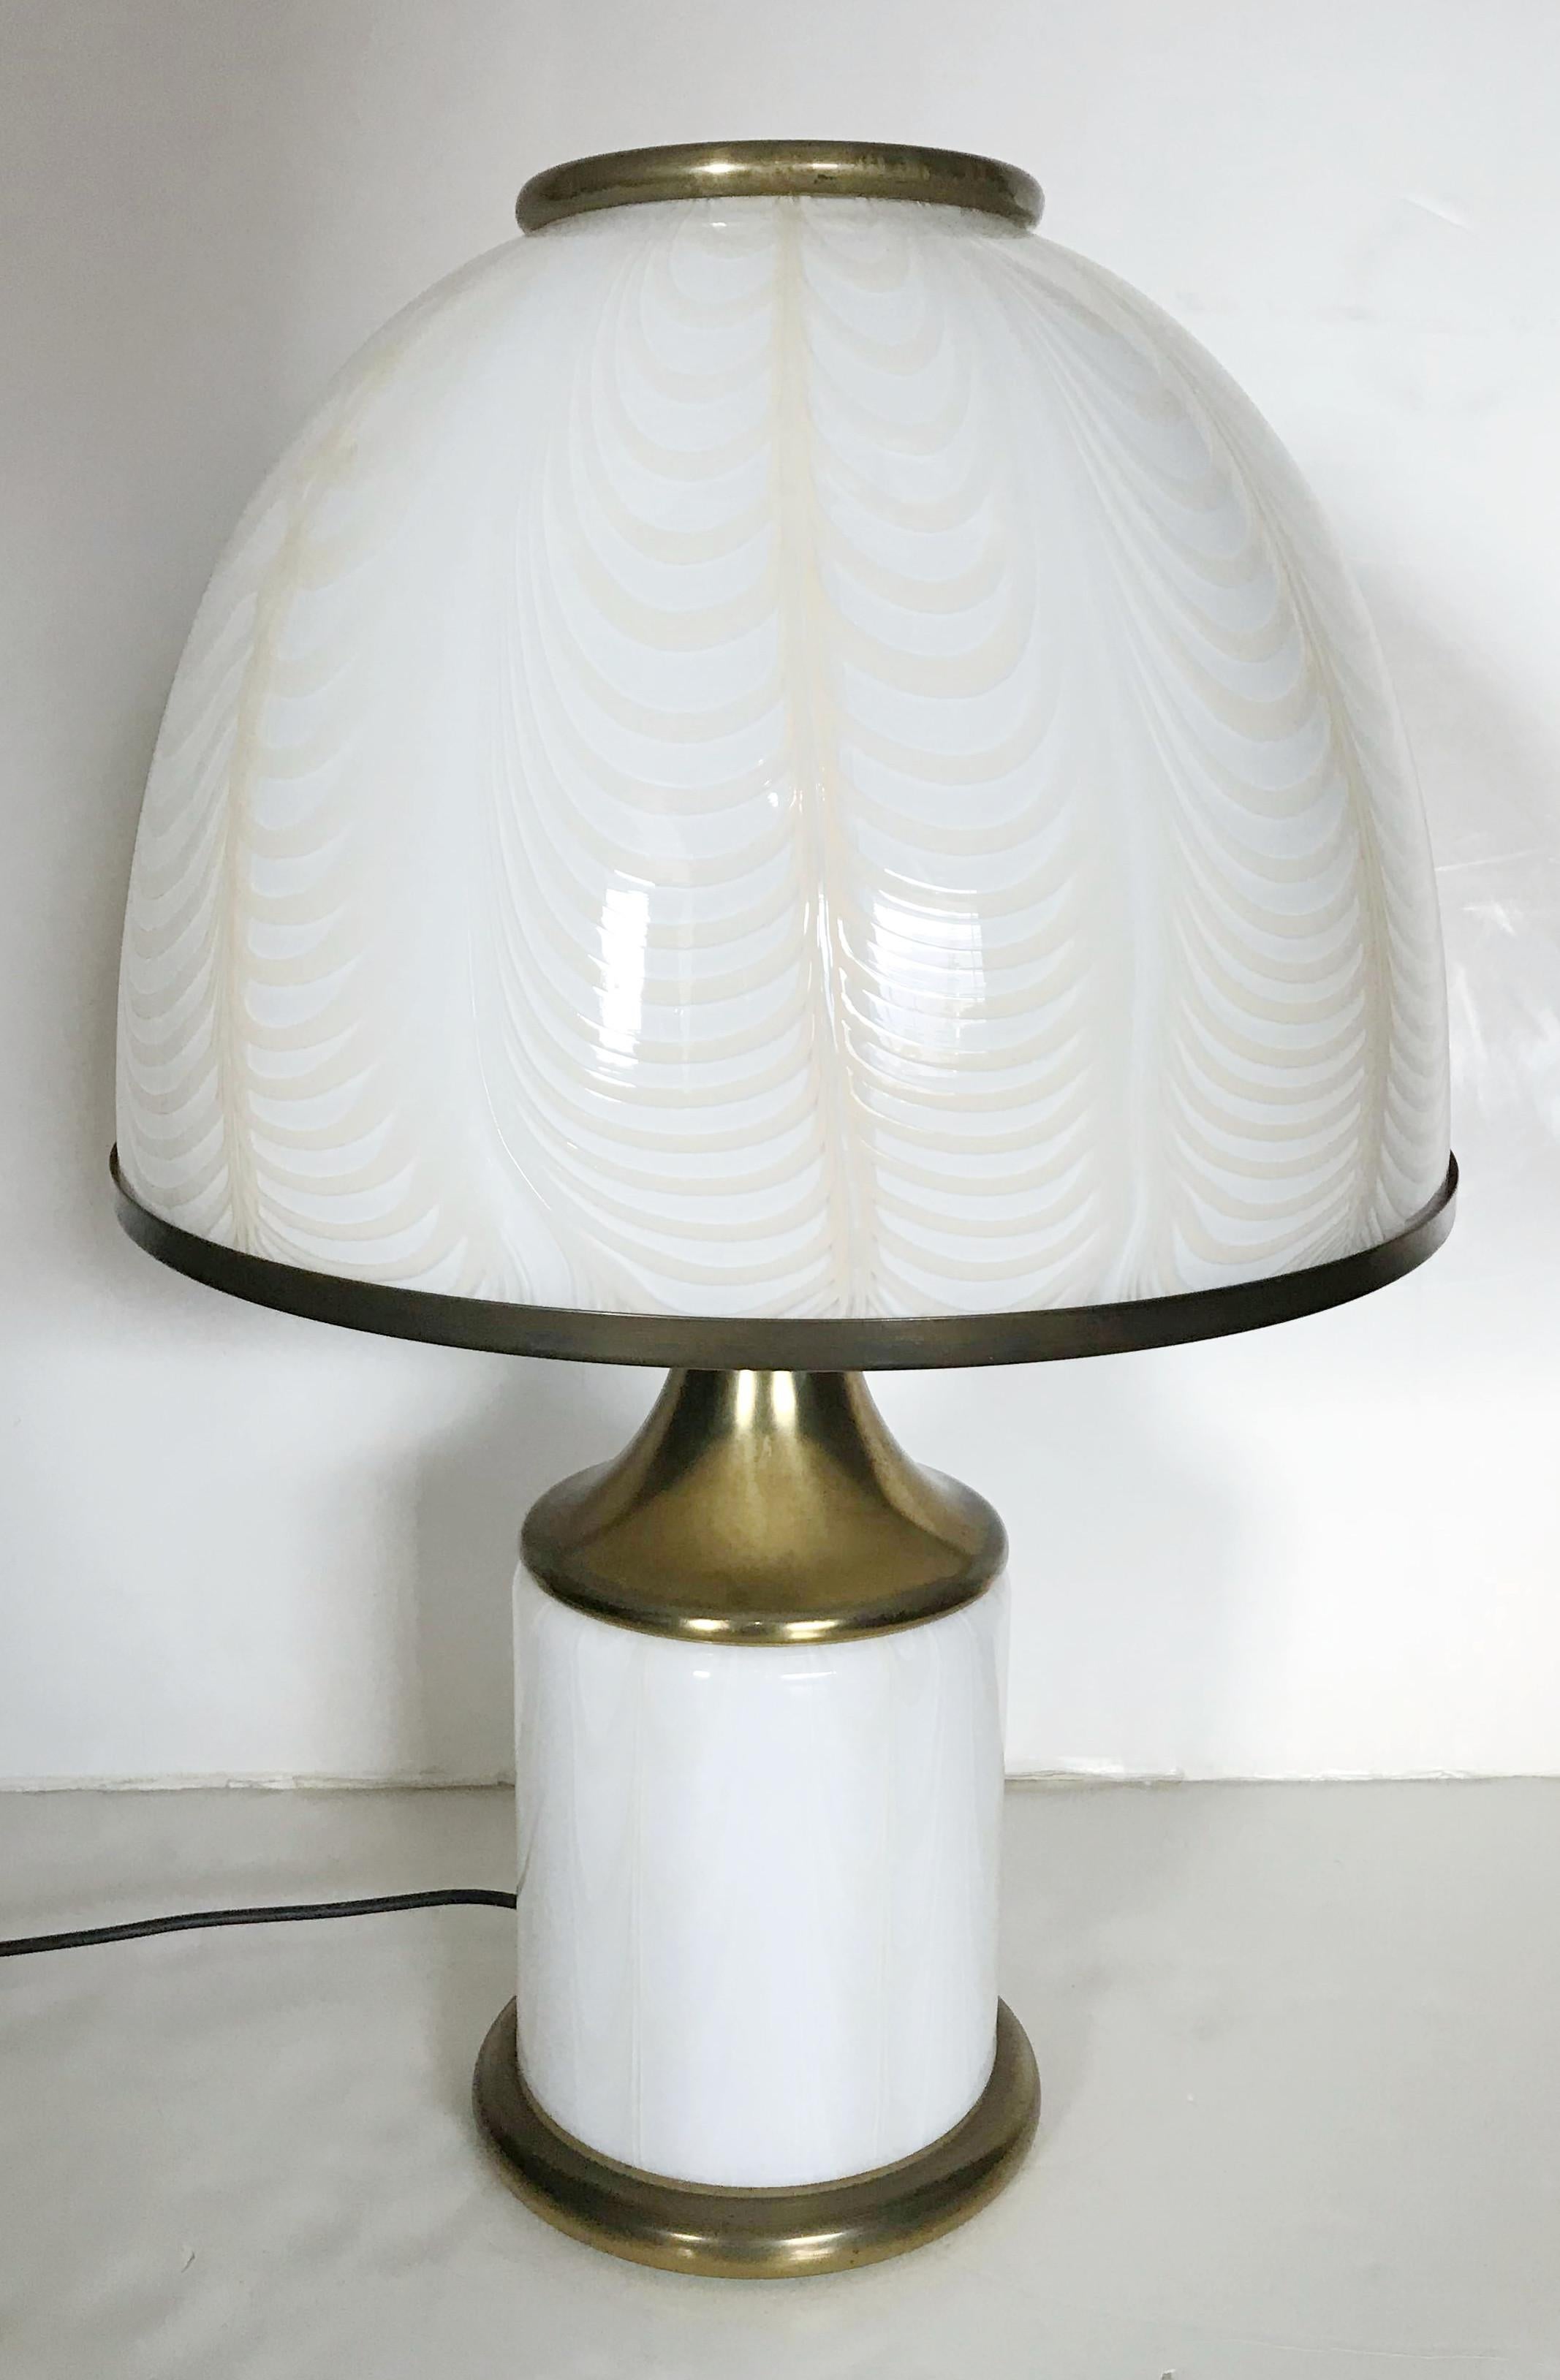 Italian vintage table lamp with cream colored Murano glass decorated with amber feather-shaped details on brass hardware, by F. Fabbian for Mazzega / Made in Italy in the 1970s
2 lights / 1 in the shade and 1 in the base / E26 or E27 type / max 60W